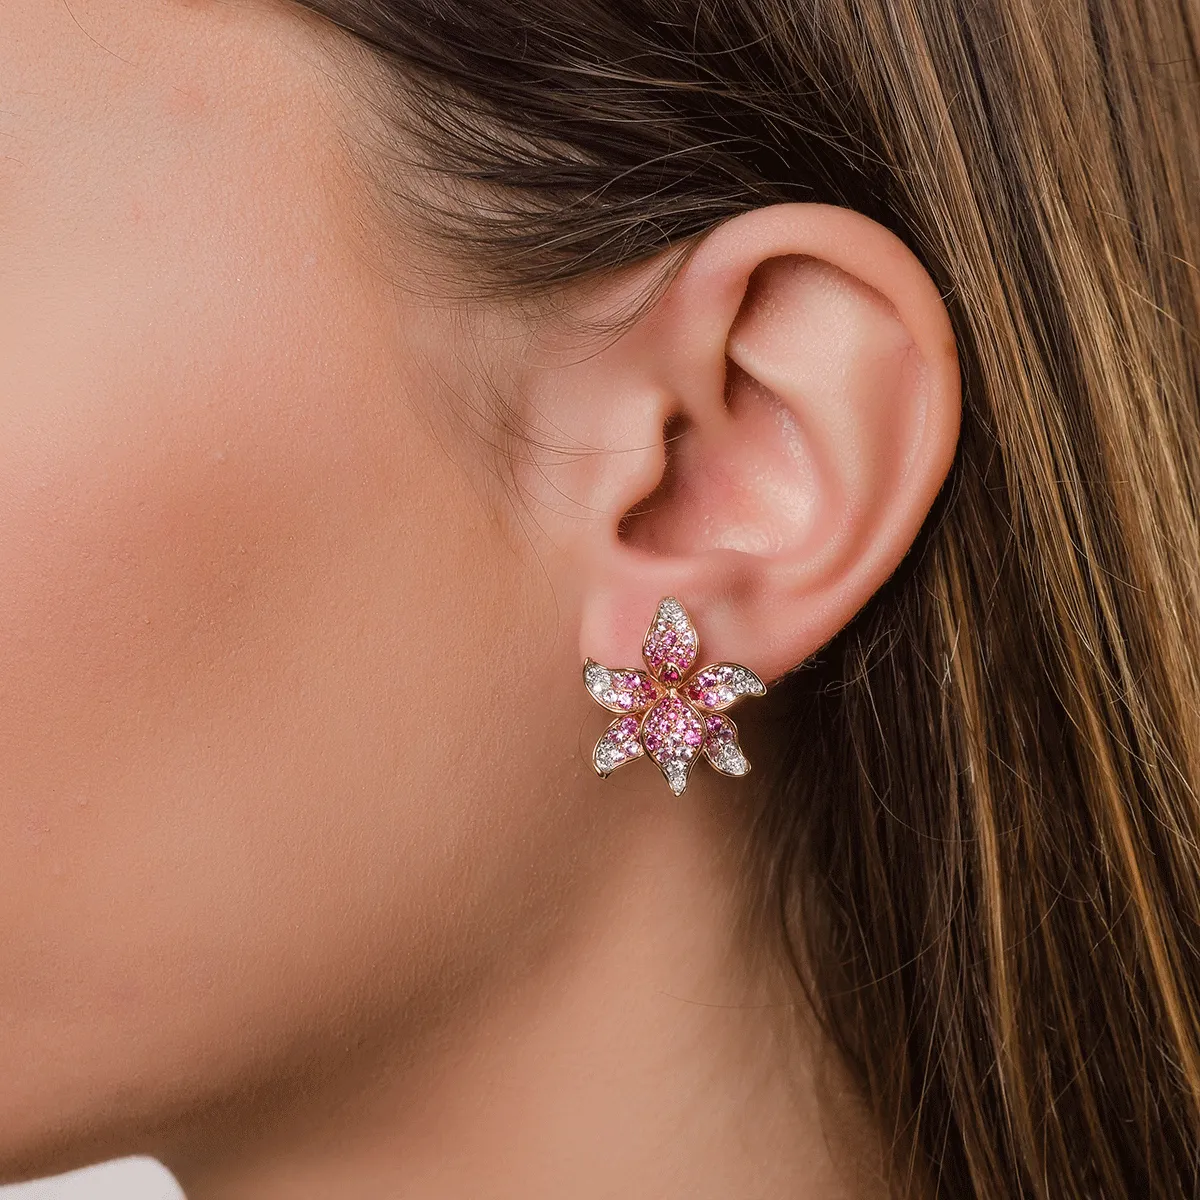 18K rose gold earrings with 2.45ct precious stones